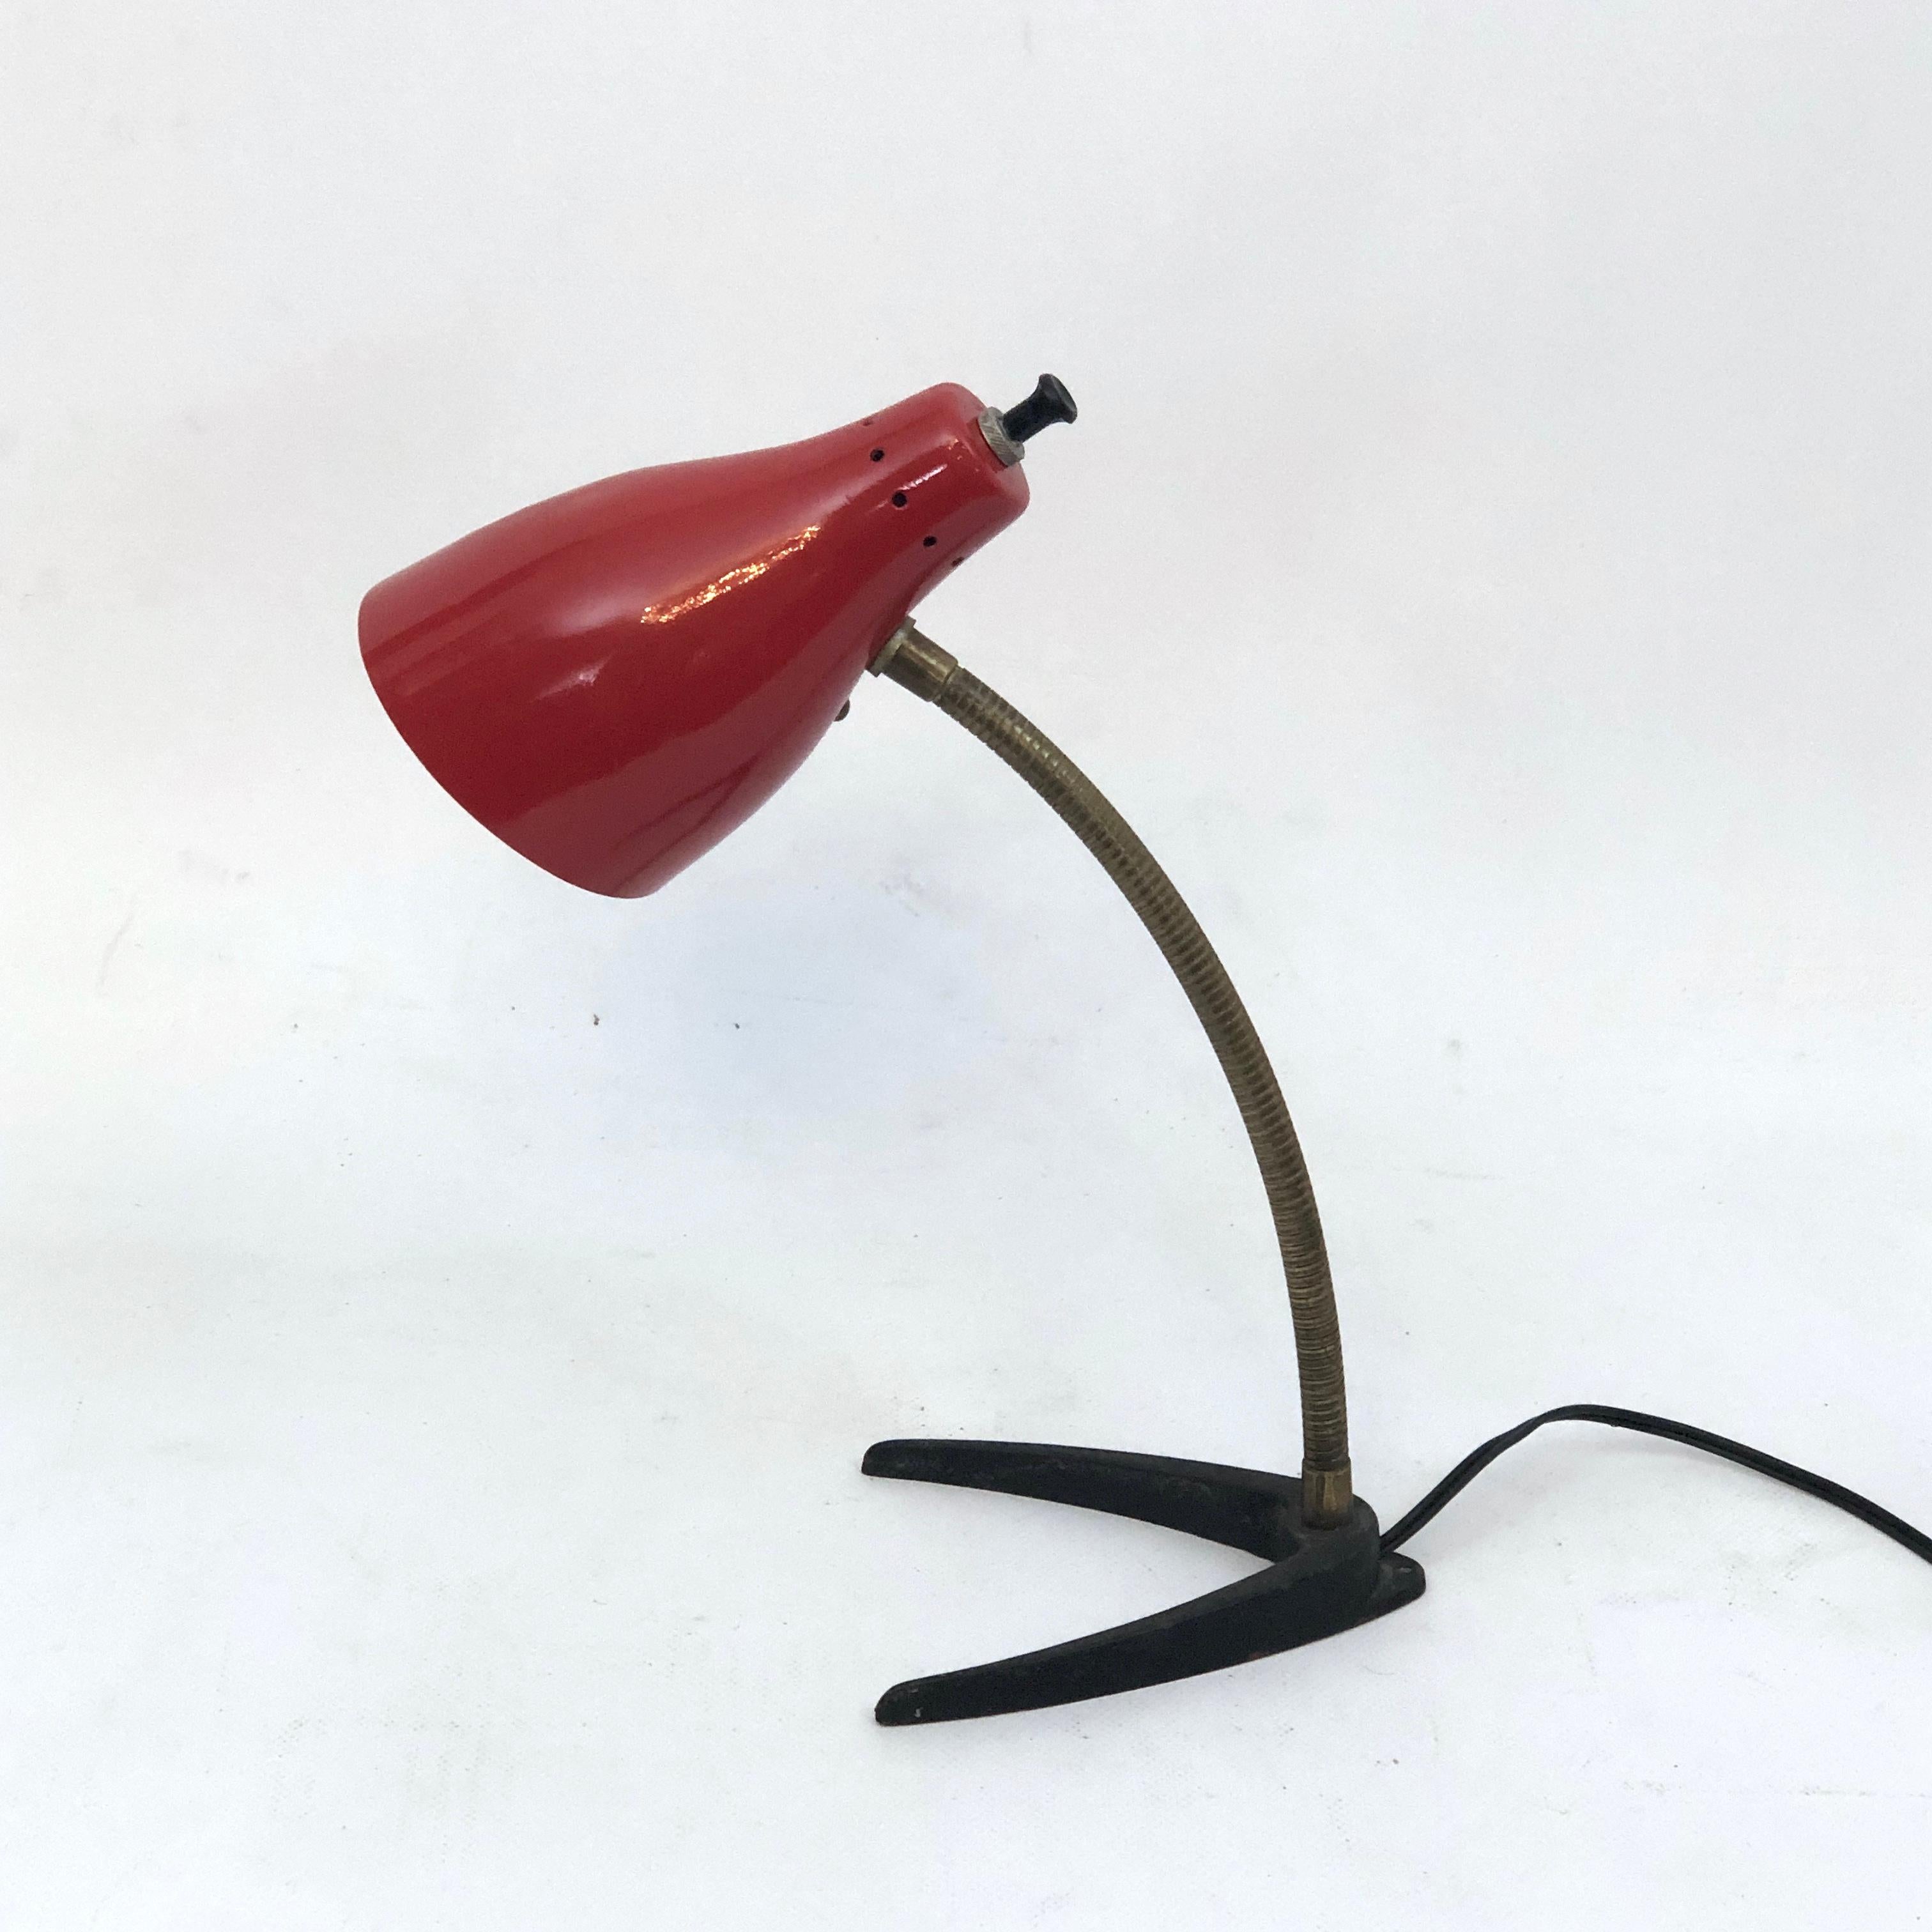 Very good vintage condition for this table lamp produced in Italy during the 50s and made from red lacquer and brass. Full working with EU standard, adaptable on demand for USA standard.